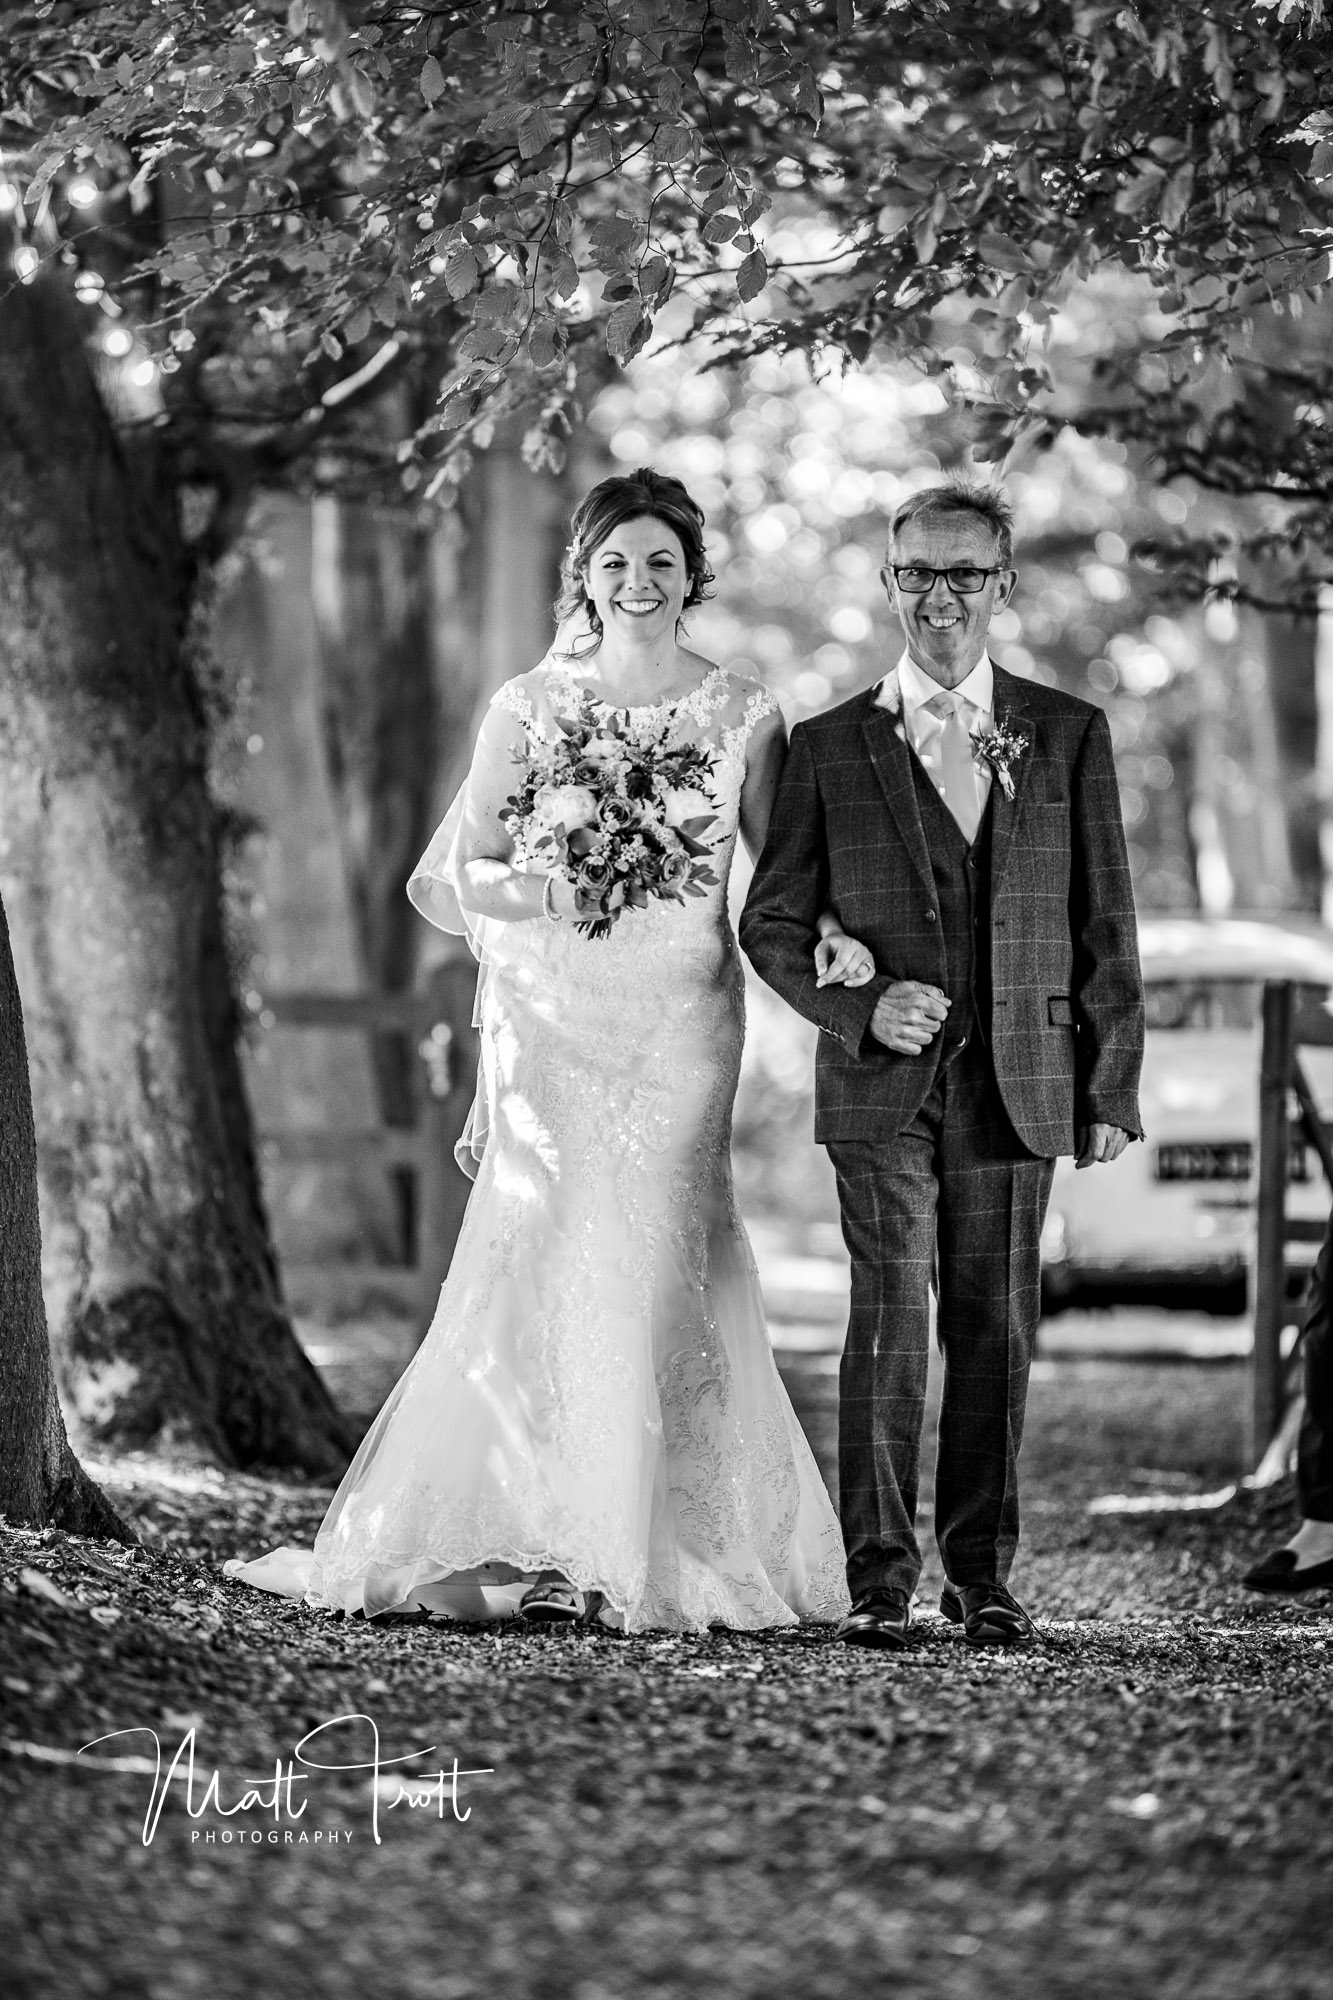 Bride and dad walking down the tree aisle outdoors at crown lodge kent